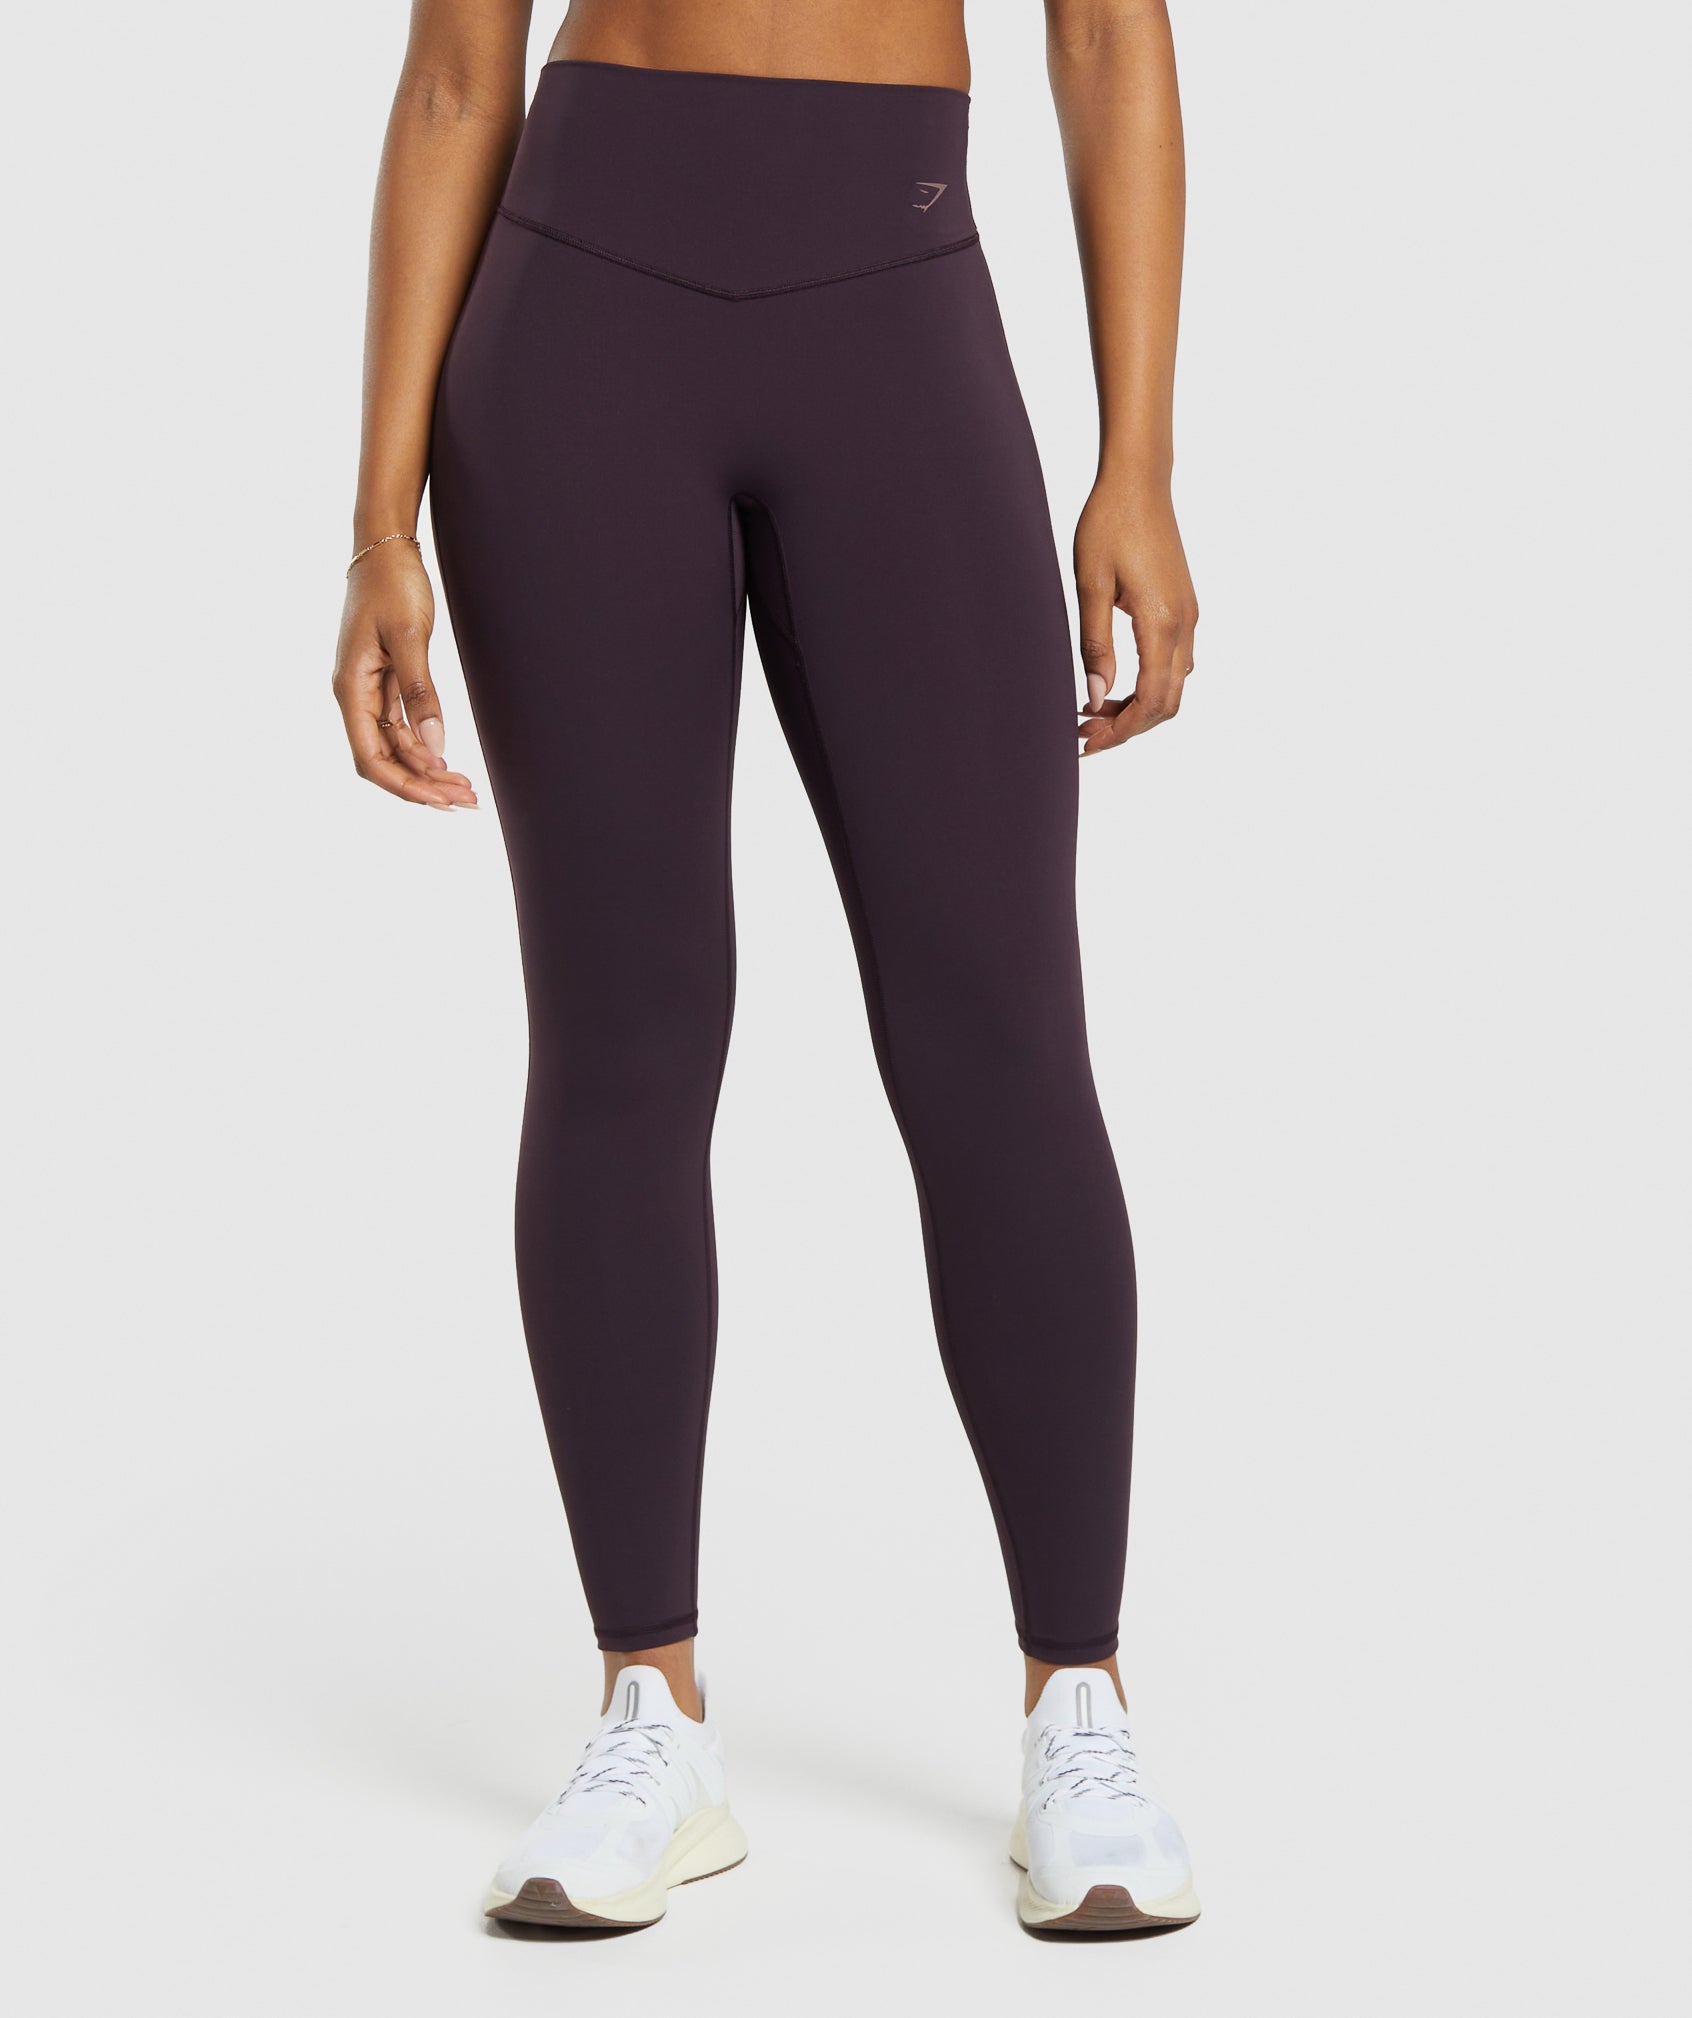 Elevate Leggings in Plum Brown is out of stock